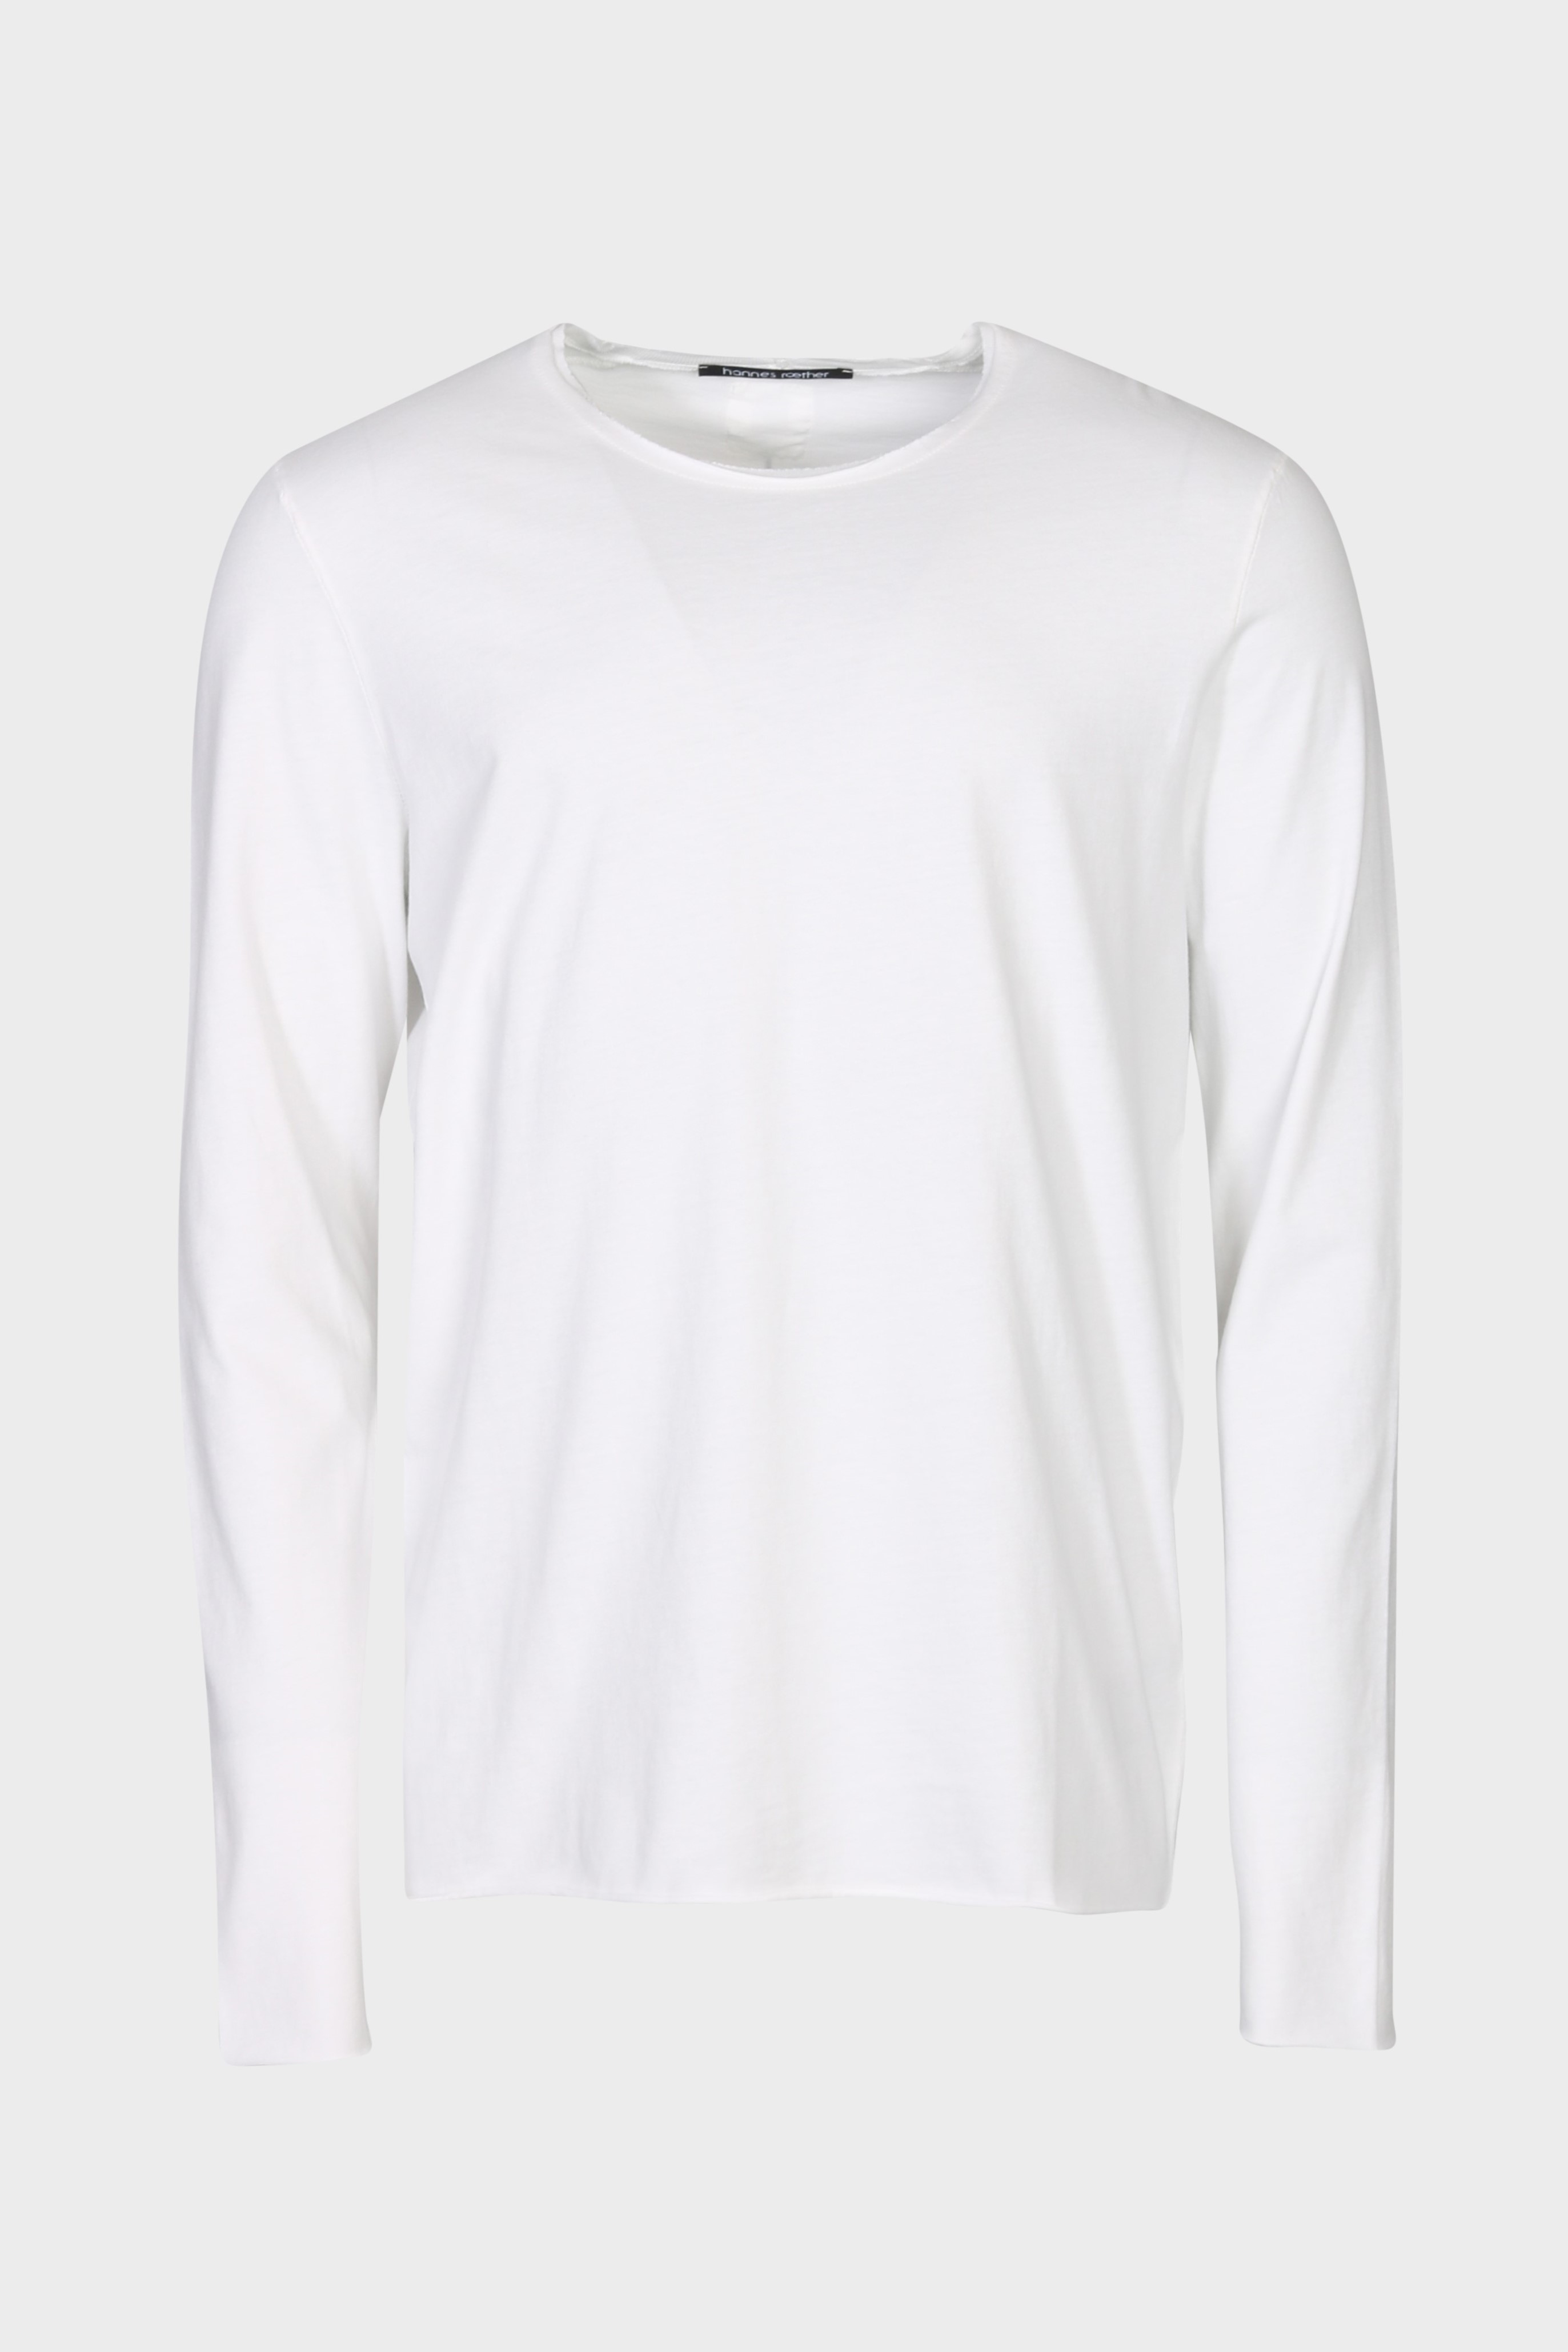 HANNES ROETHER Longsleeve in Off White